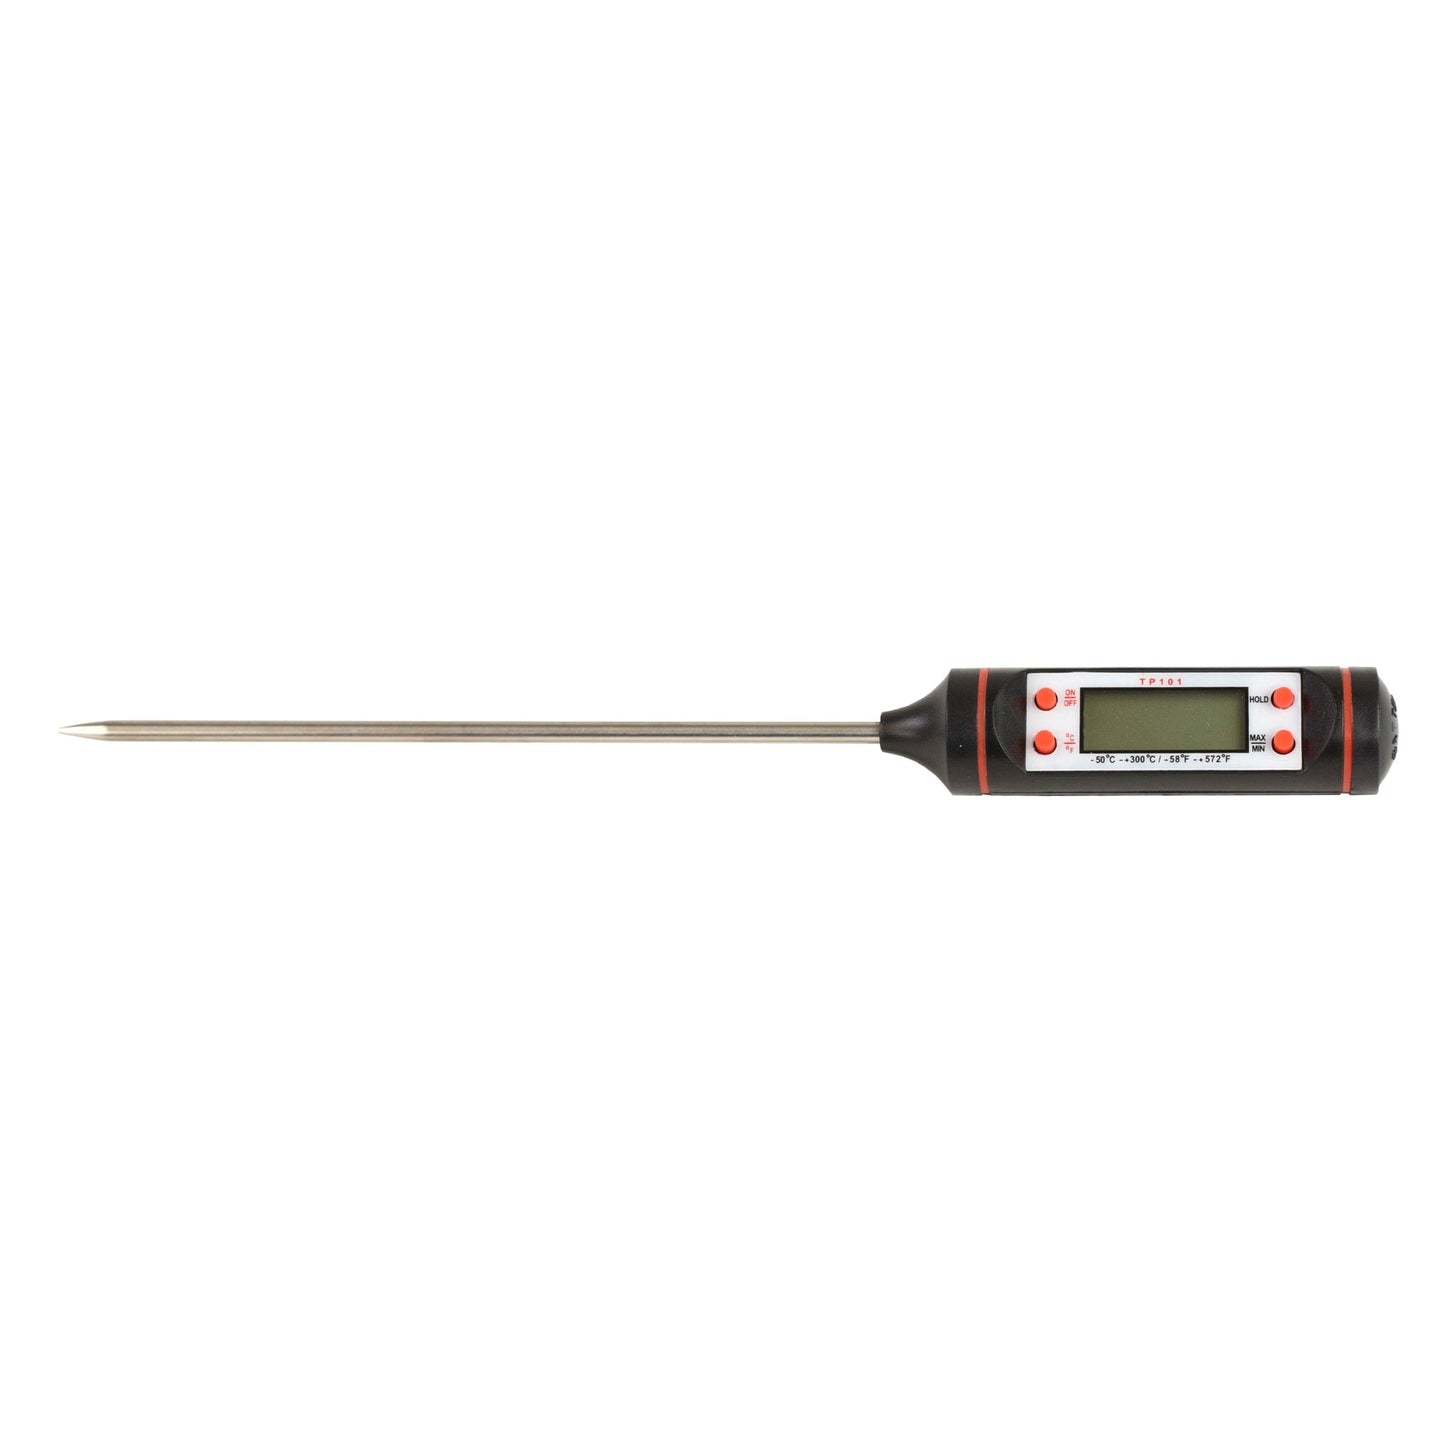 Digital Cooking Thermometer, Black